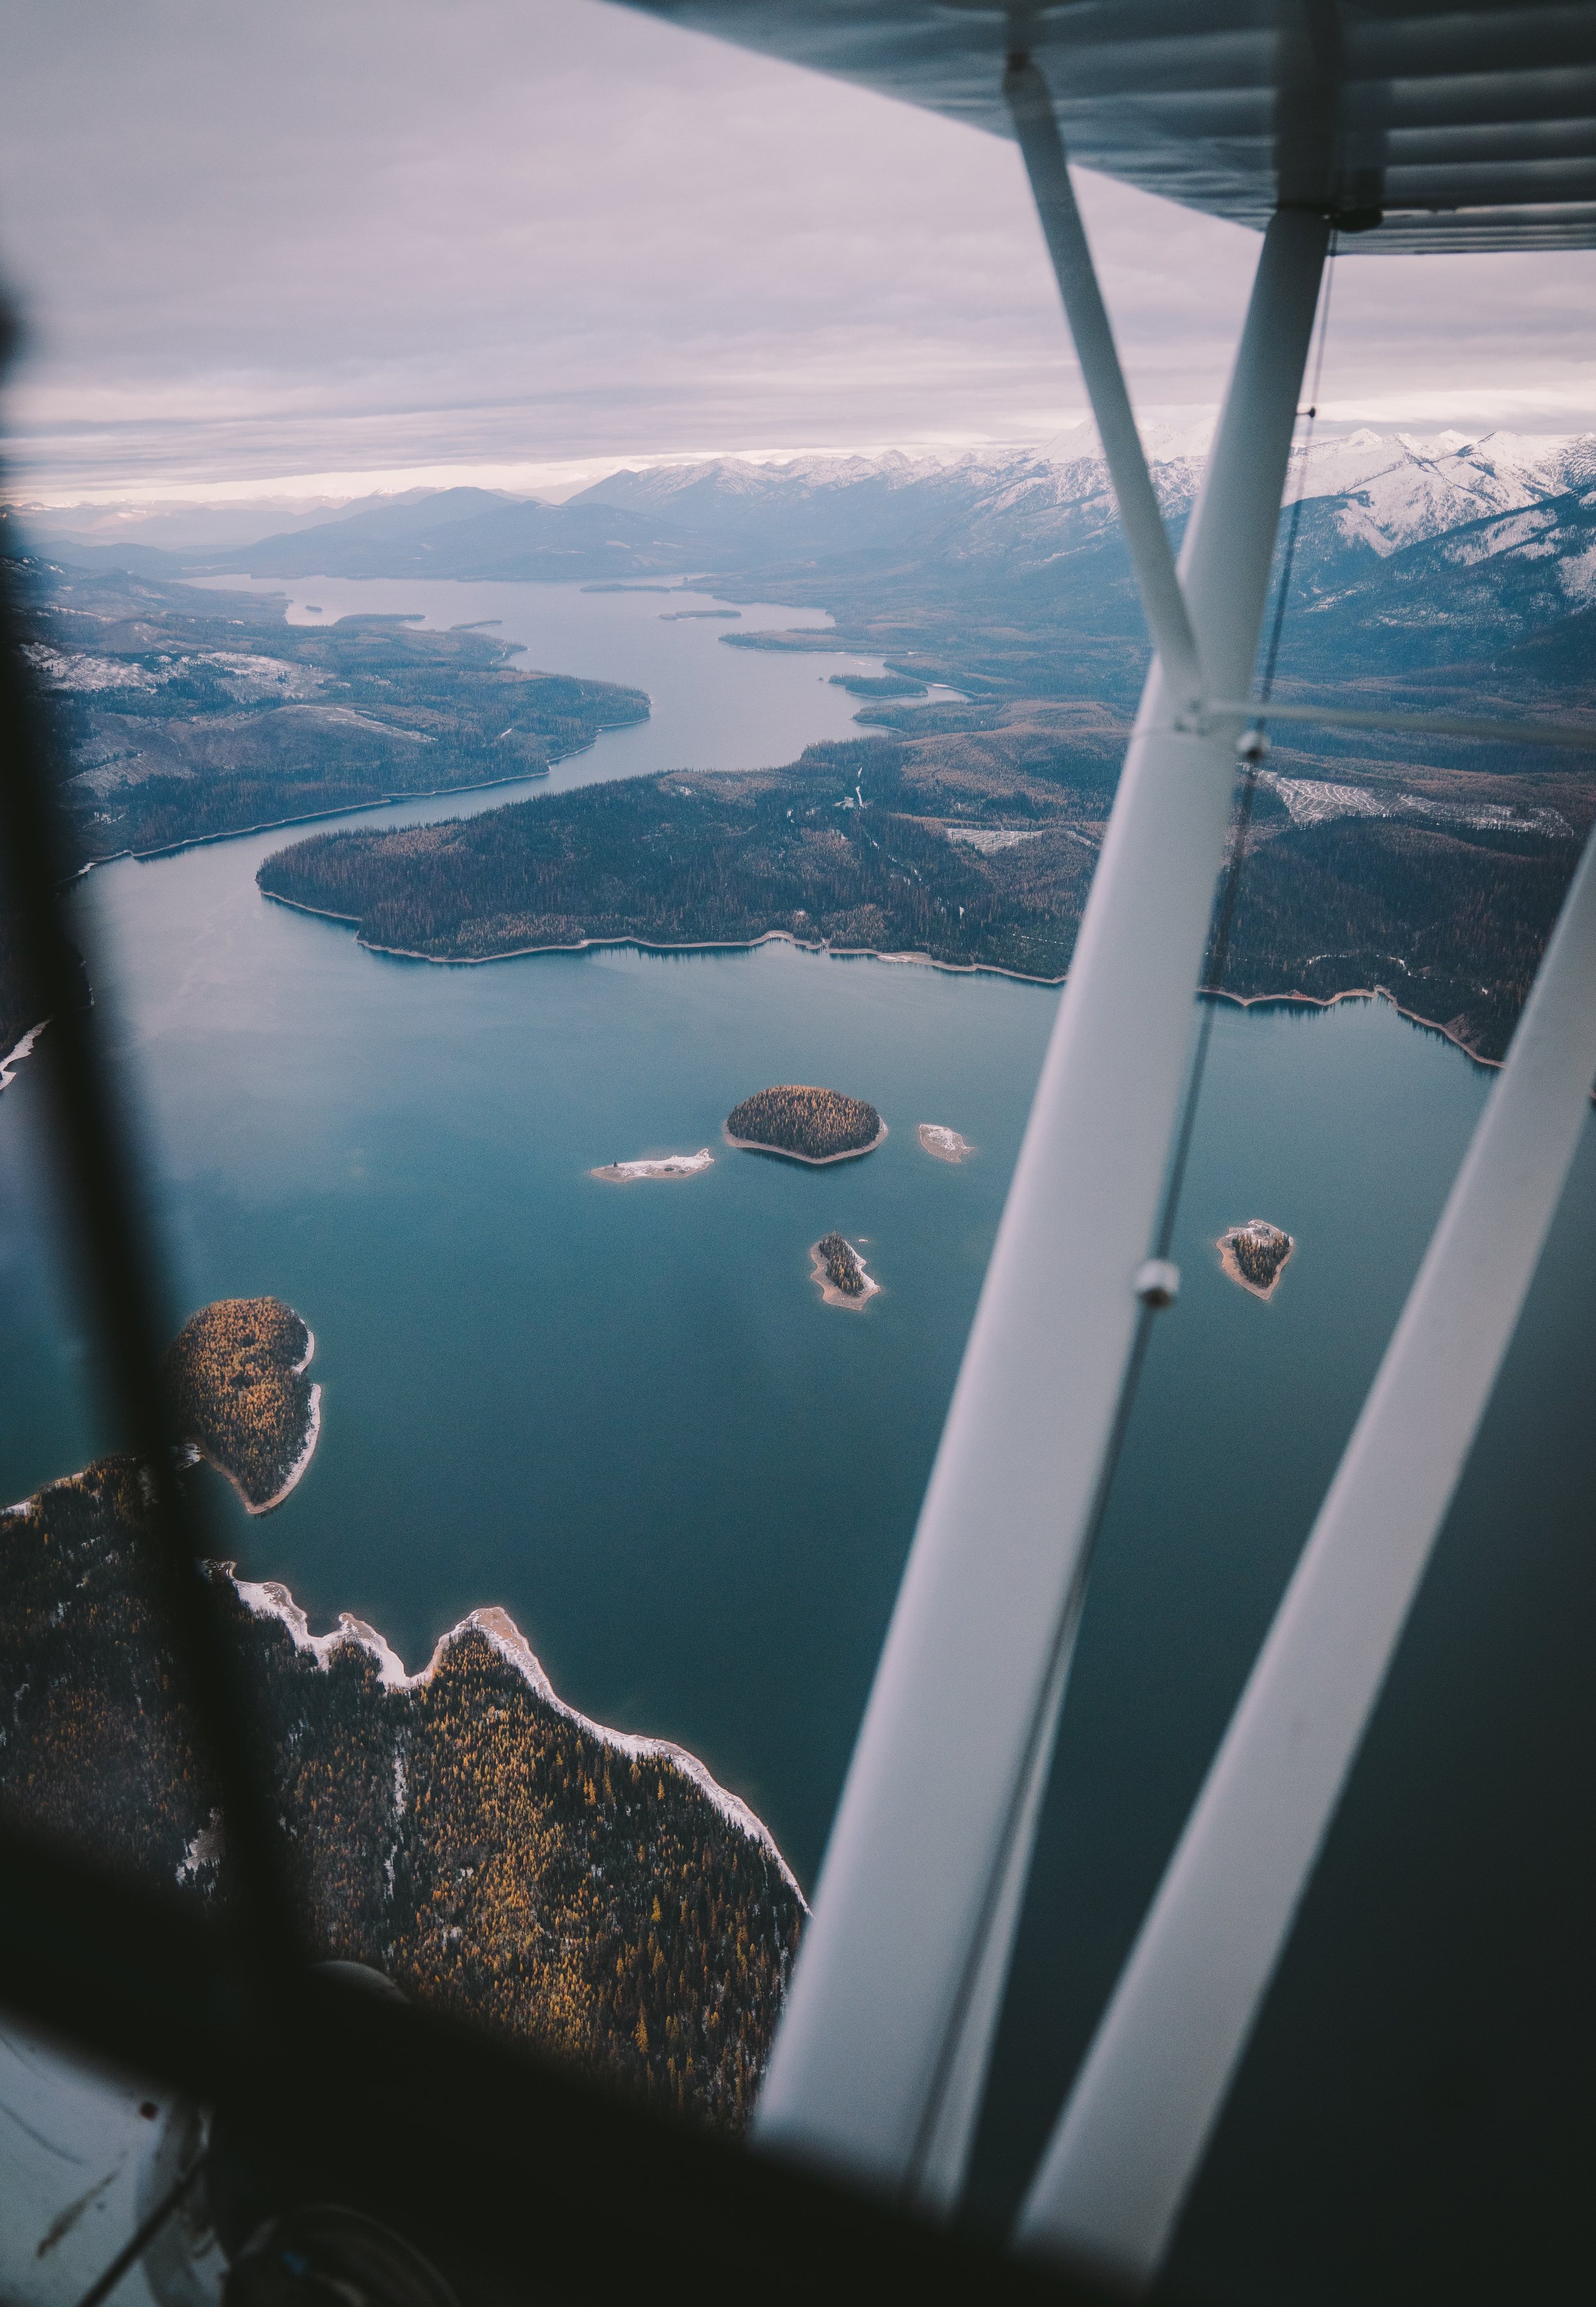 Aerial view of a body of water from the window of a small plane